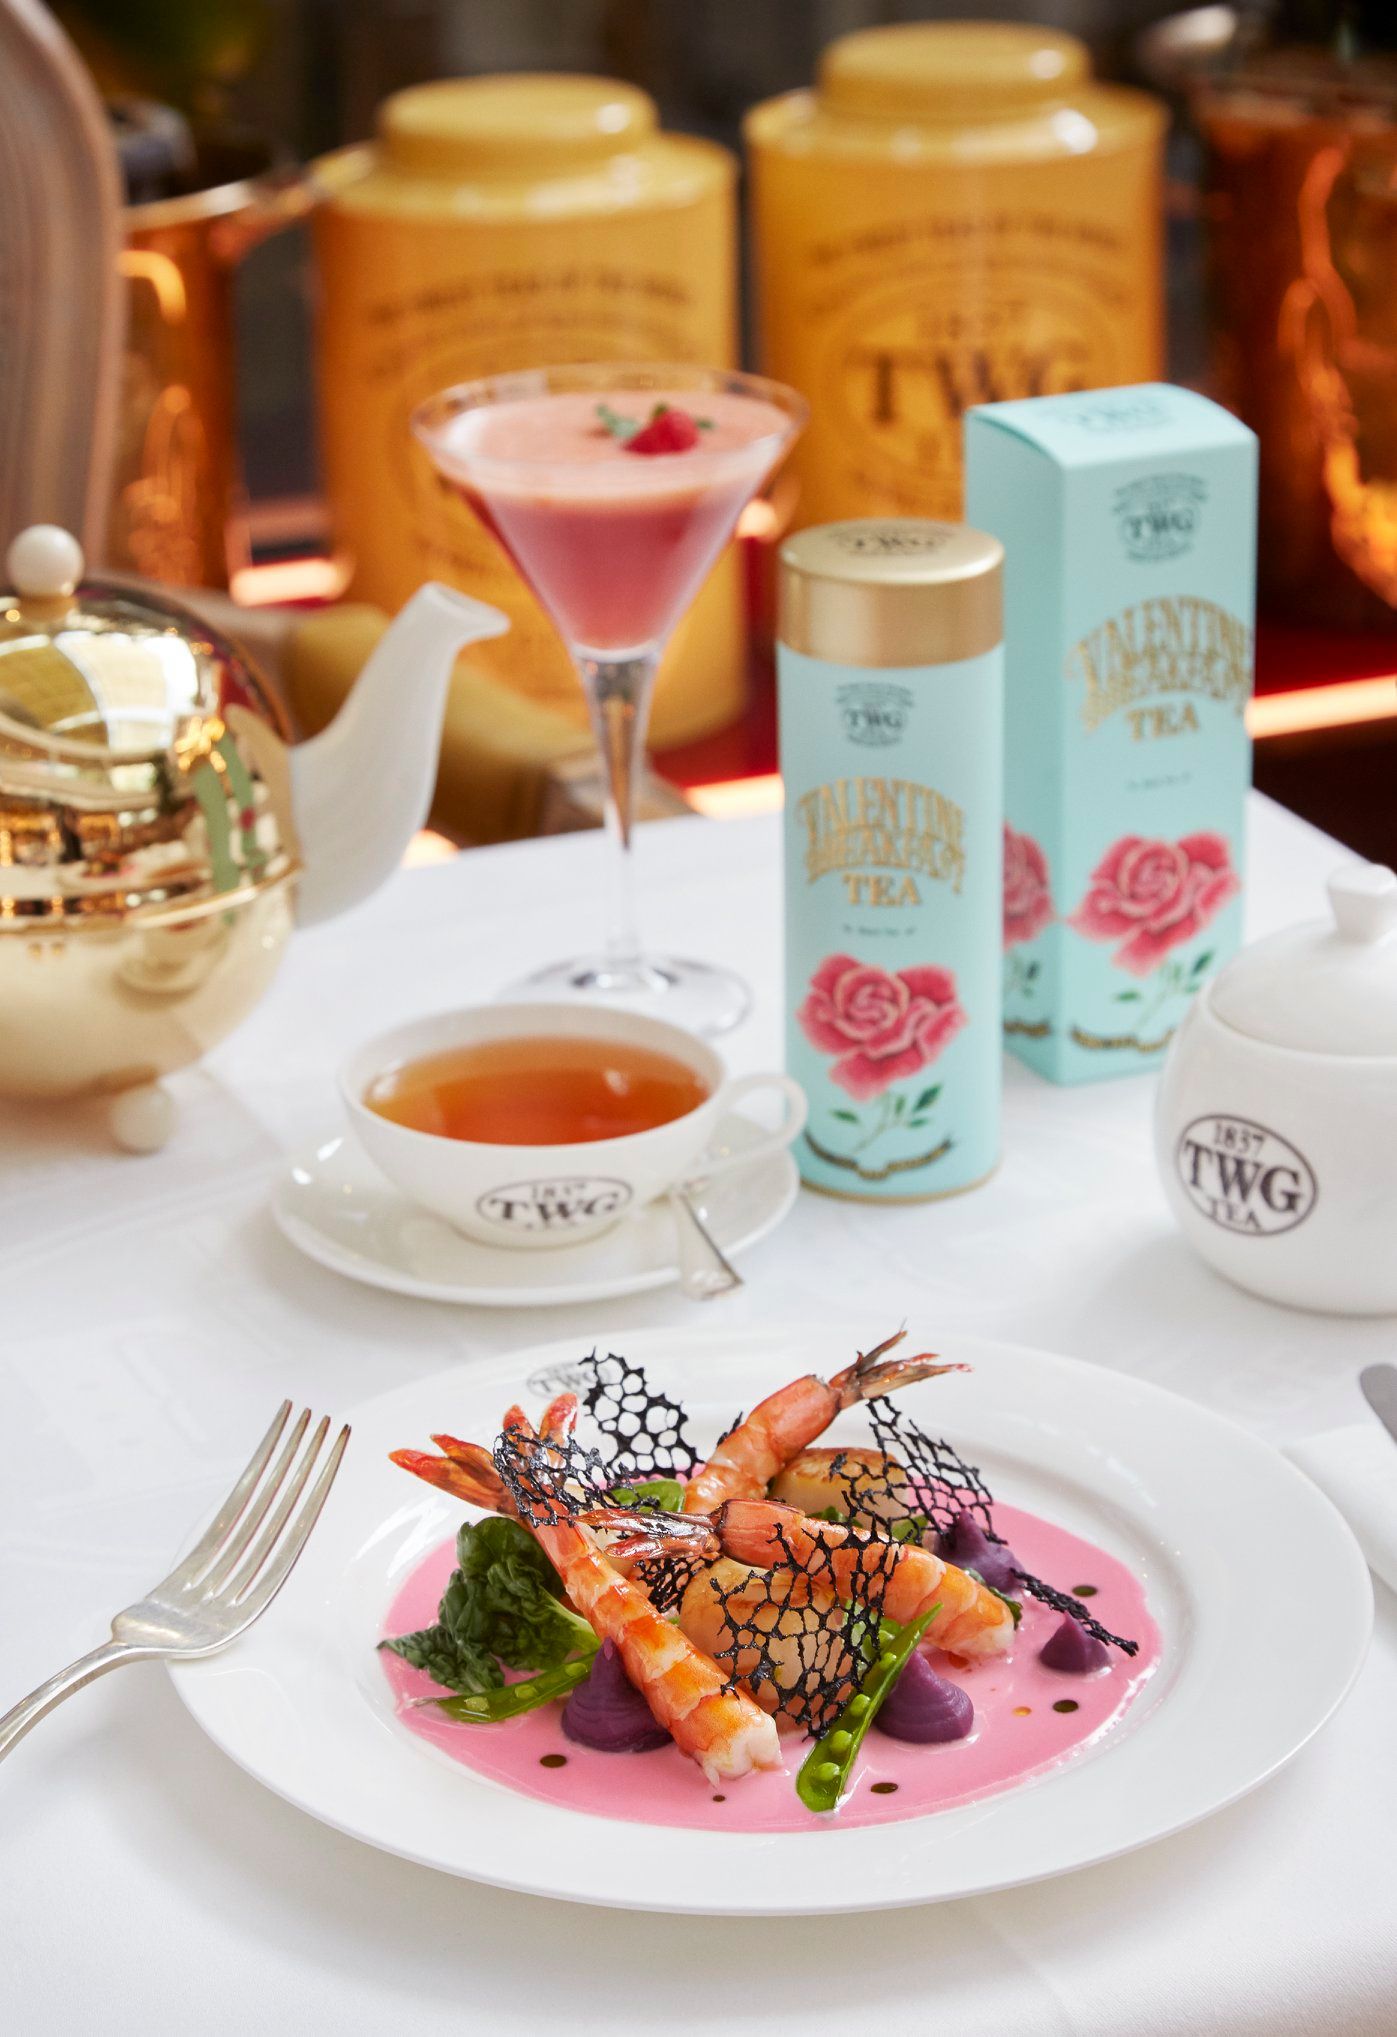 TWG Tea offers the perfect setting for you and your beloved on this special occasion with a tea-infused Valentine’s Day Set Menu created to enchant and delight the taste buds. Roasted Hokkaido scallops and Caledonian prawns, accompanied by braised citrus daikon, silky purple sweet potato mash and snap peas served with a beurre blanc sauce infused with Earl Grey d’Amour. Available from now till 14th February, at all TWG Tea Salons in Singapore. 